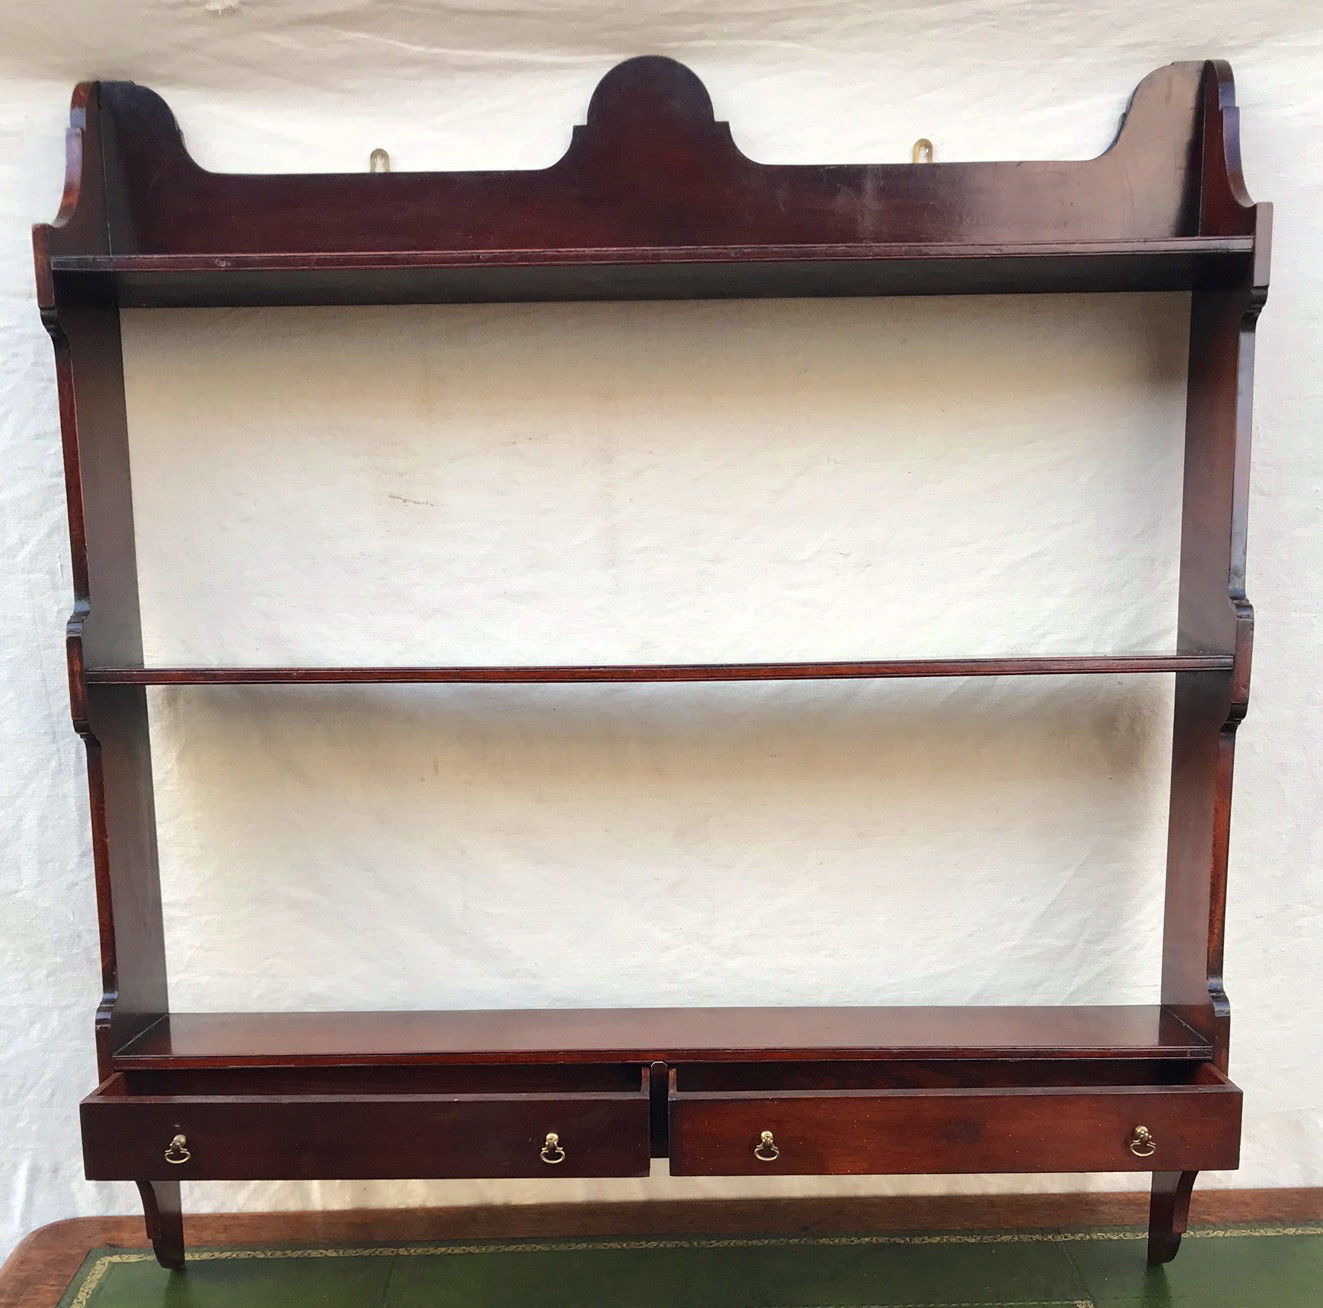 LARGE ANTIQUE CHIPPENDALE STYLE WALL SHELF IN MAHOGANY